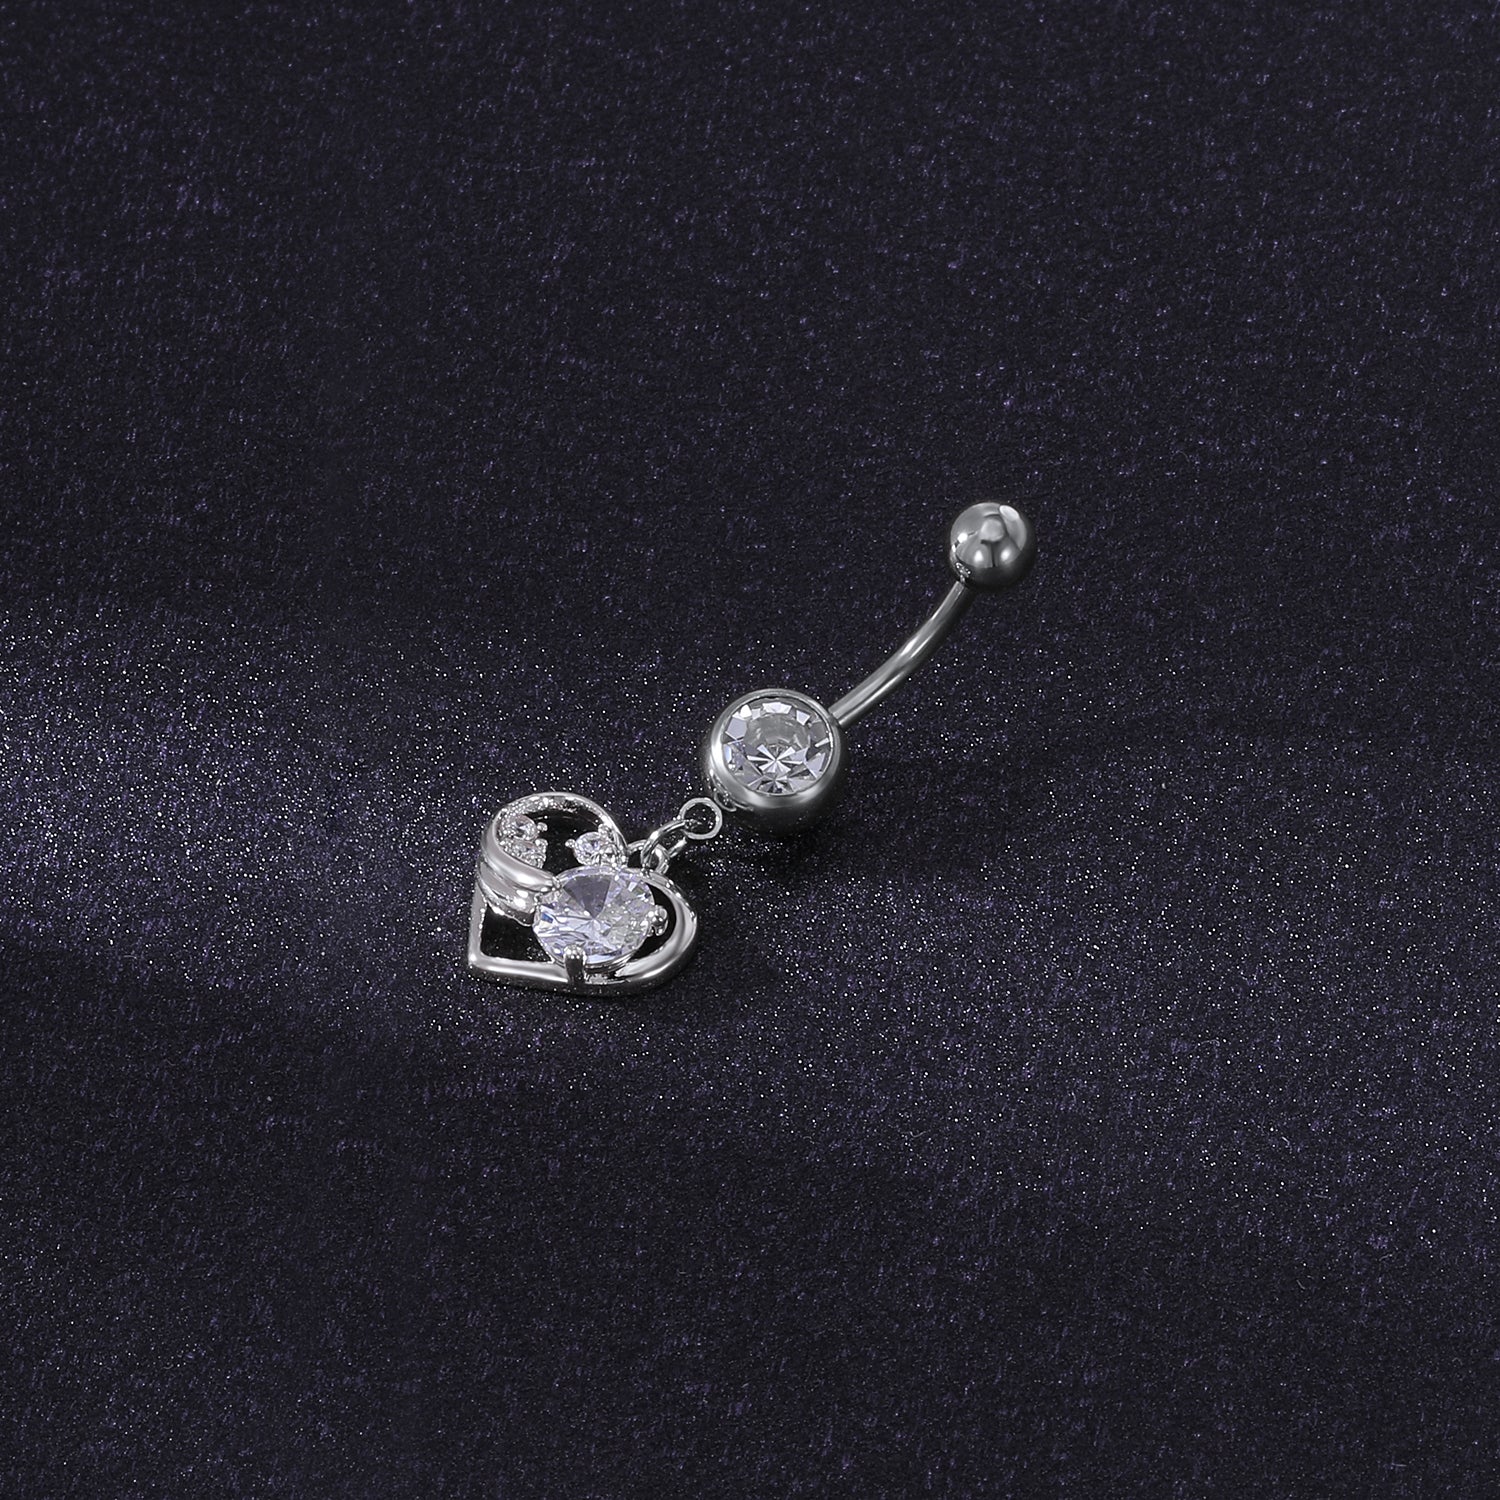 14g-Dangle-Heart-Rose-Gold-Belly-Piercing-Double-Crystal-Navel-Ring-Piercing-Jewelry